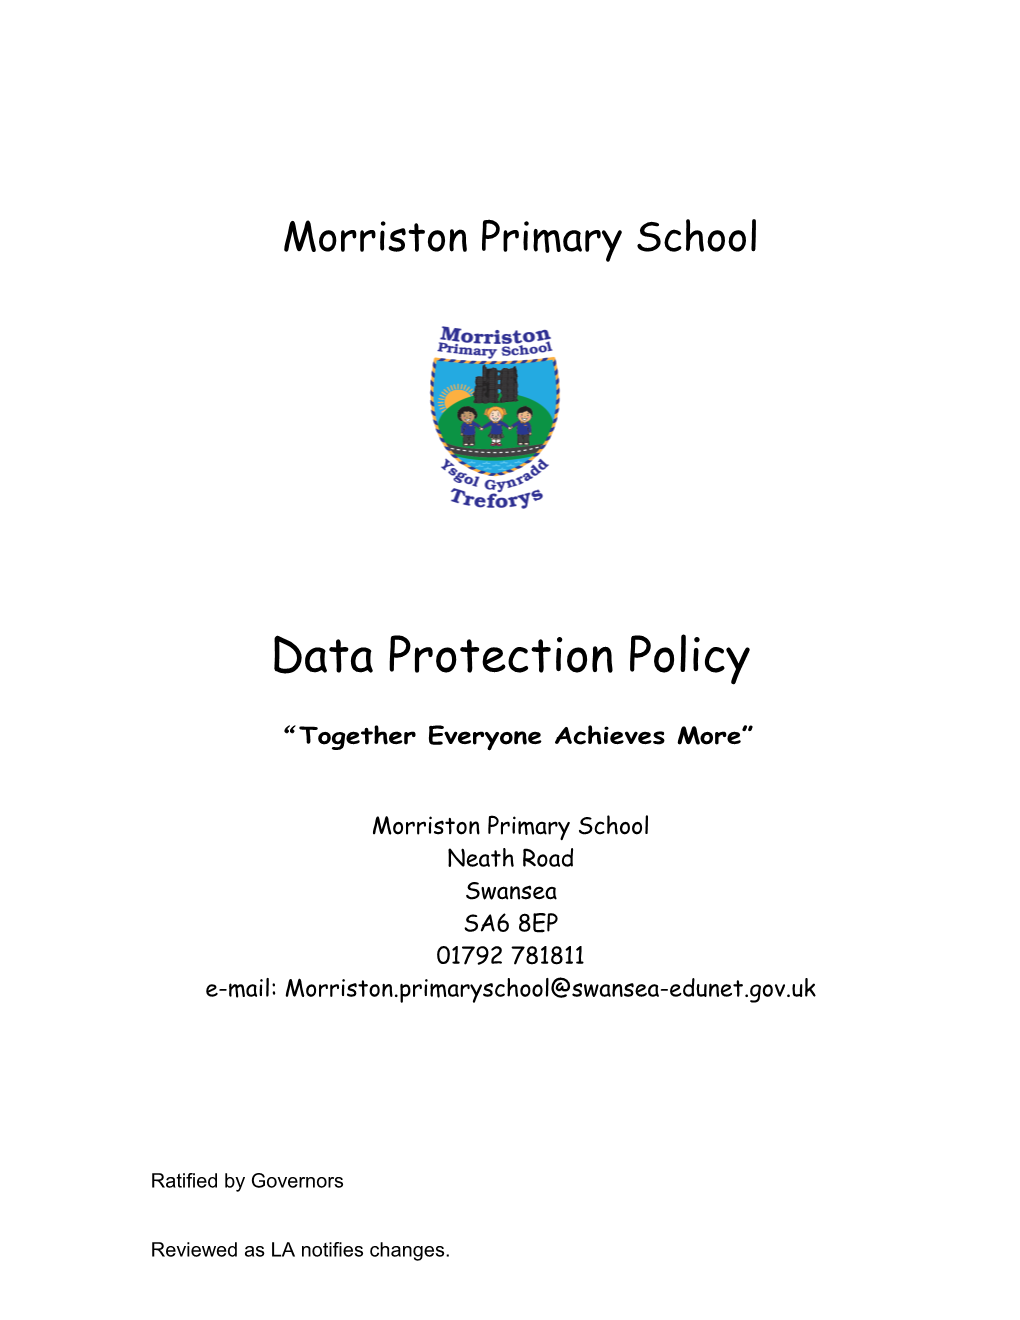 Data Protection Policy (LEA)